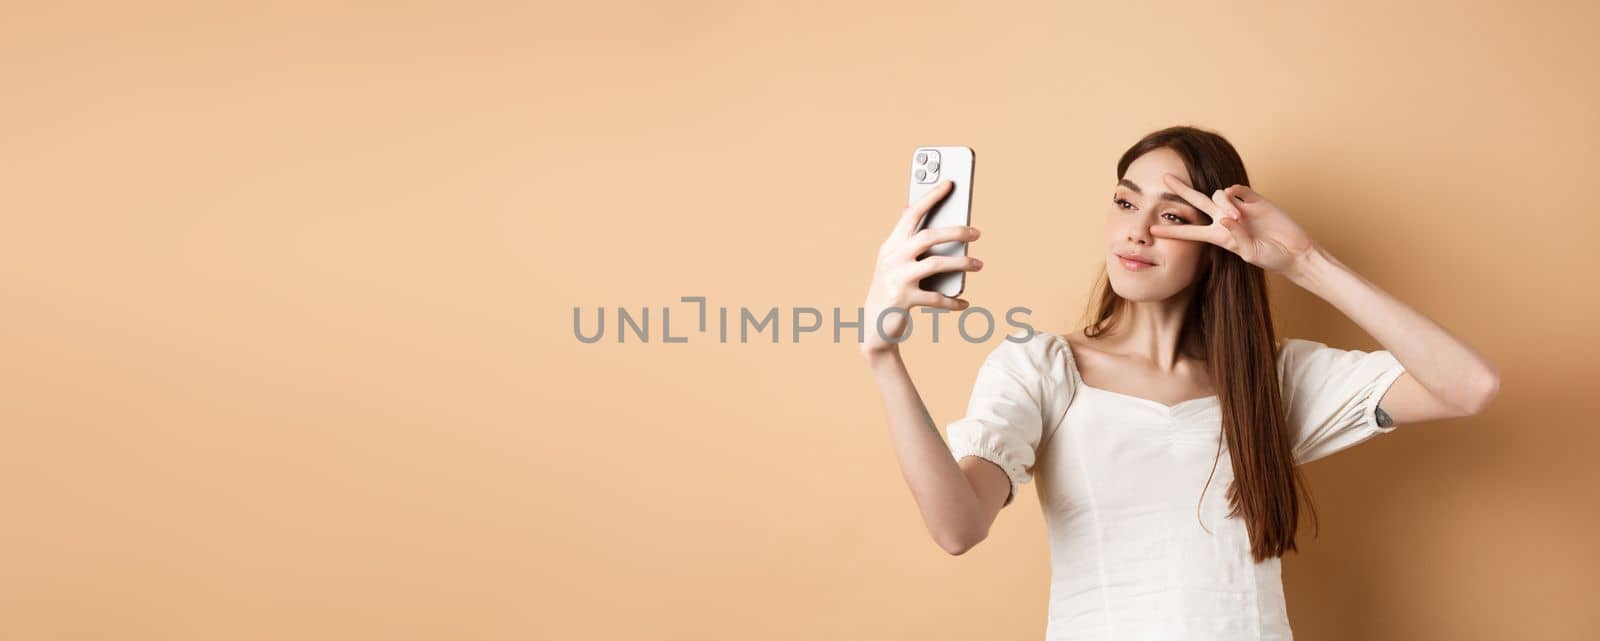 Cute woman taking selfie on smartphone, showing v-sign near eye, posing for social media photo, standing on beige background.